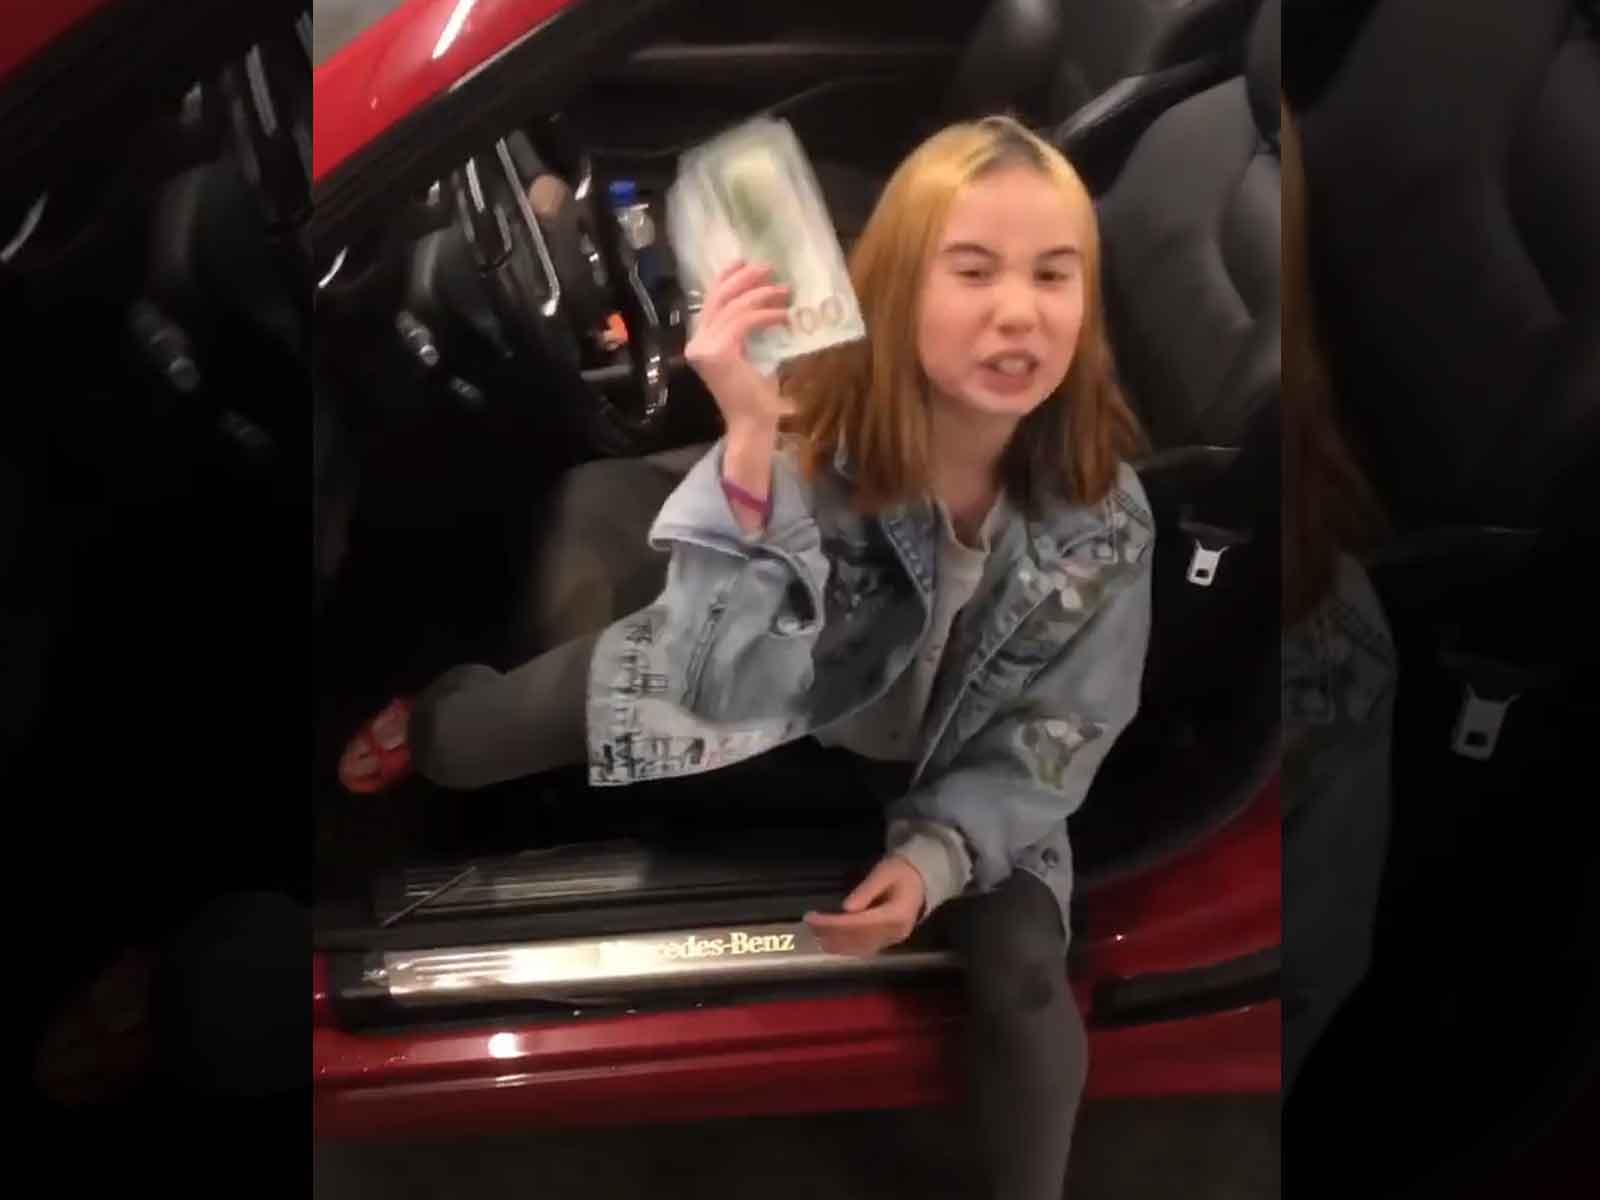 Lil Tay Exposed as a Flexing Fraud, Homes and Cars Belonged to Others